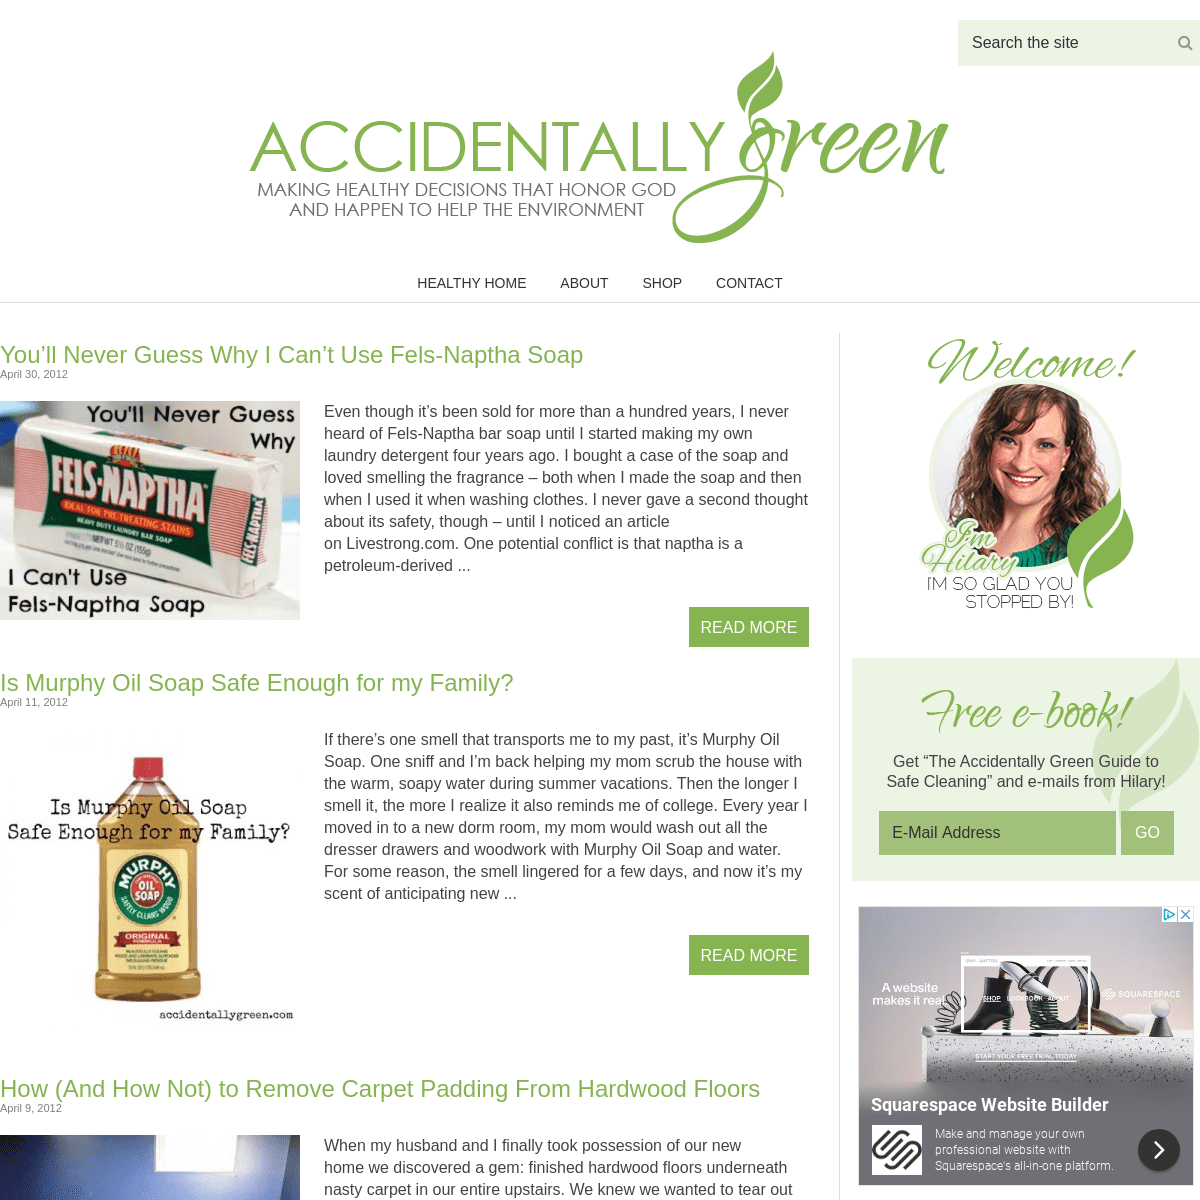 A complete backup of accidentallygreen.com